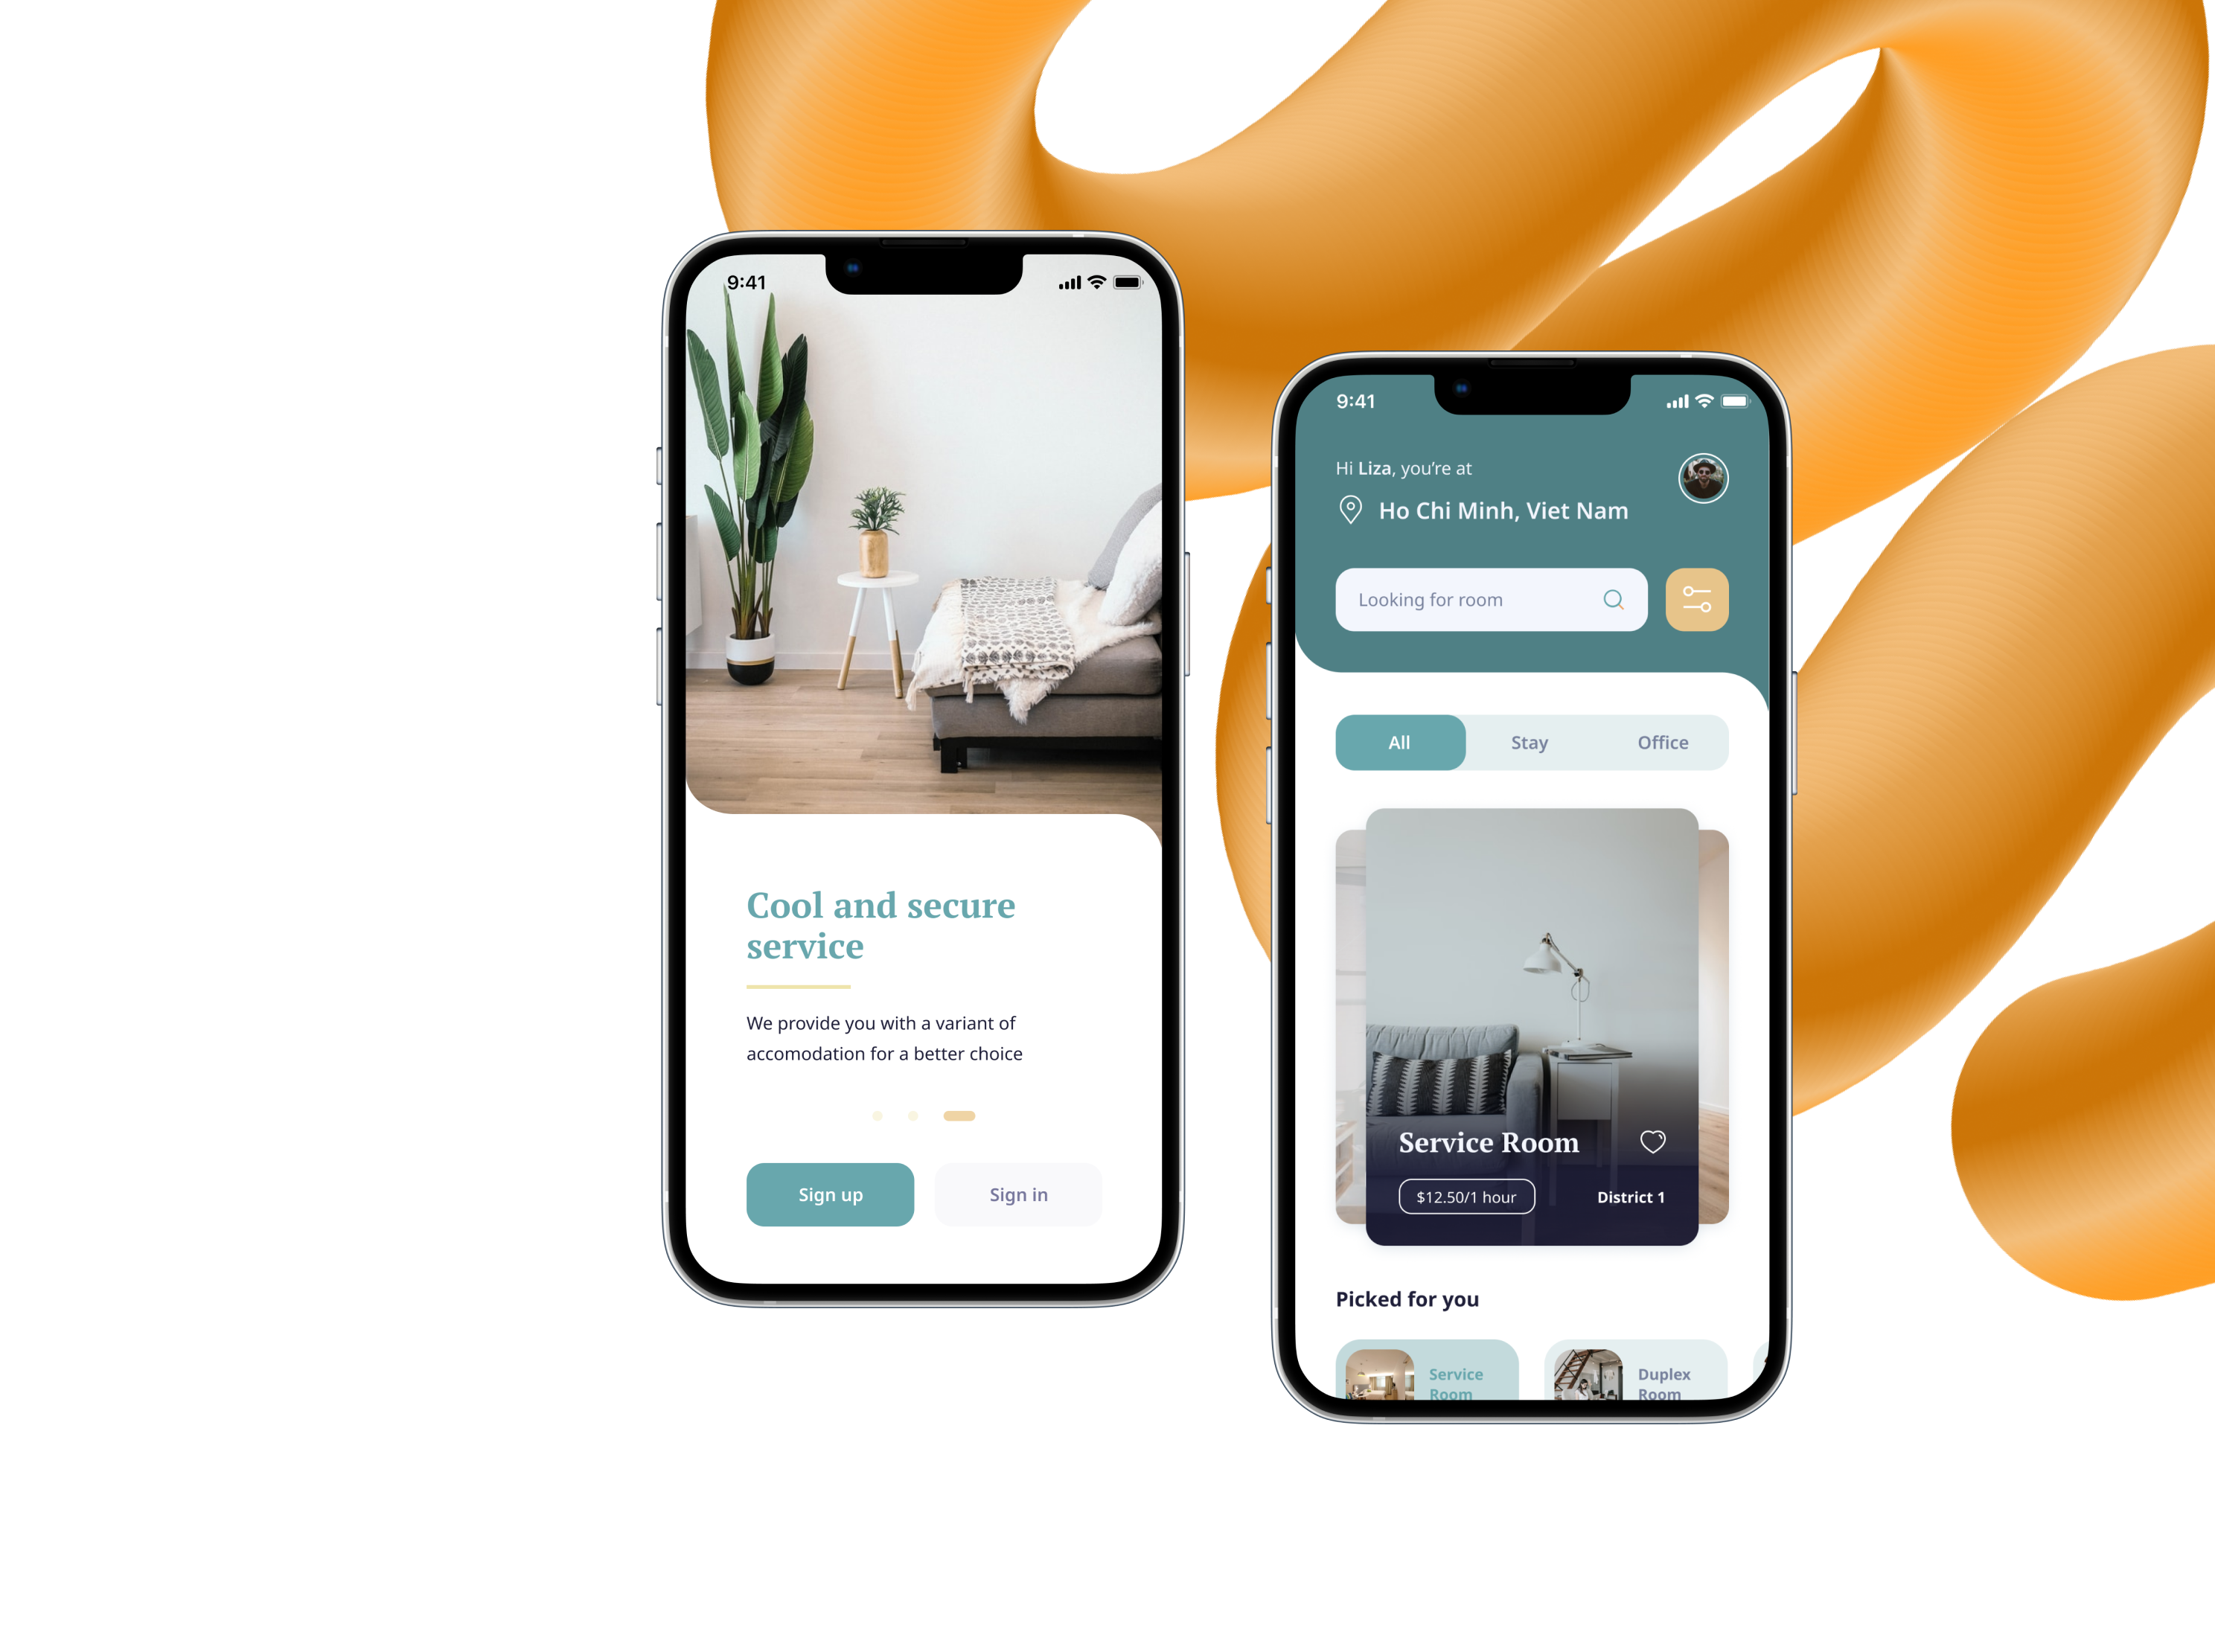 E-booking – Apartments Booking App